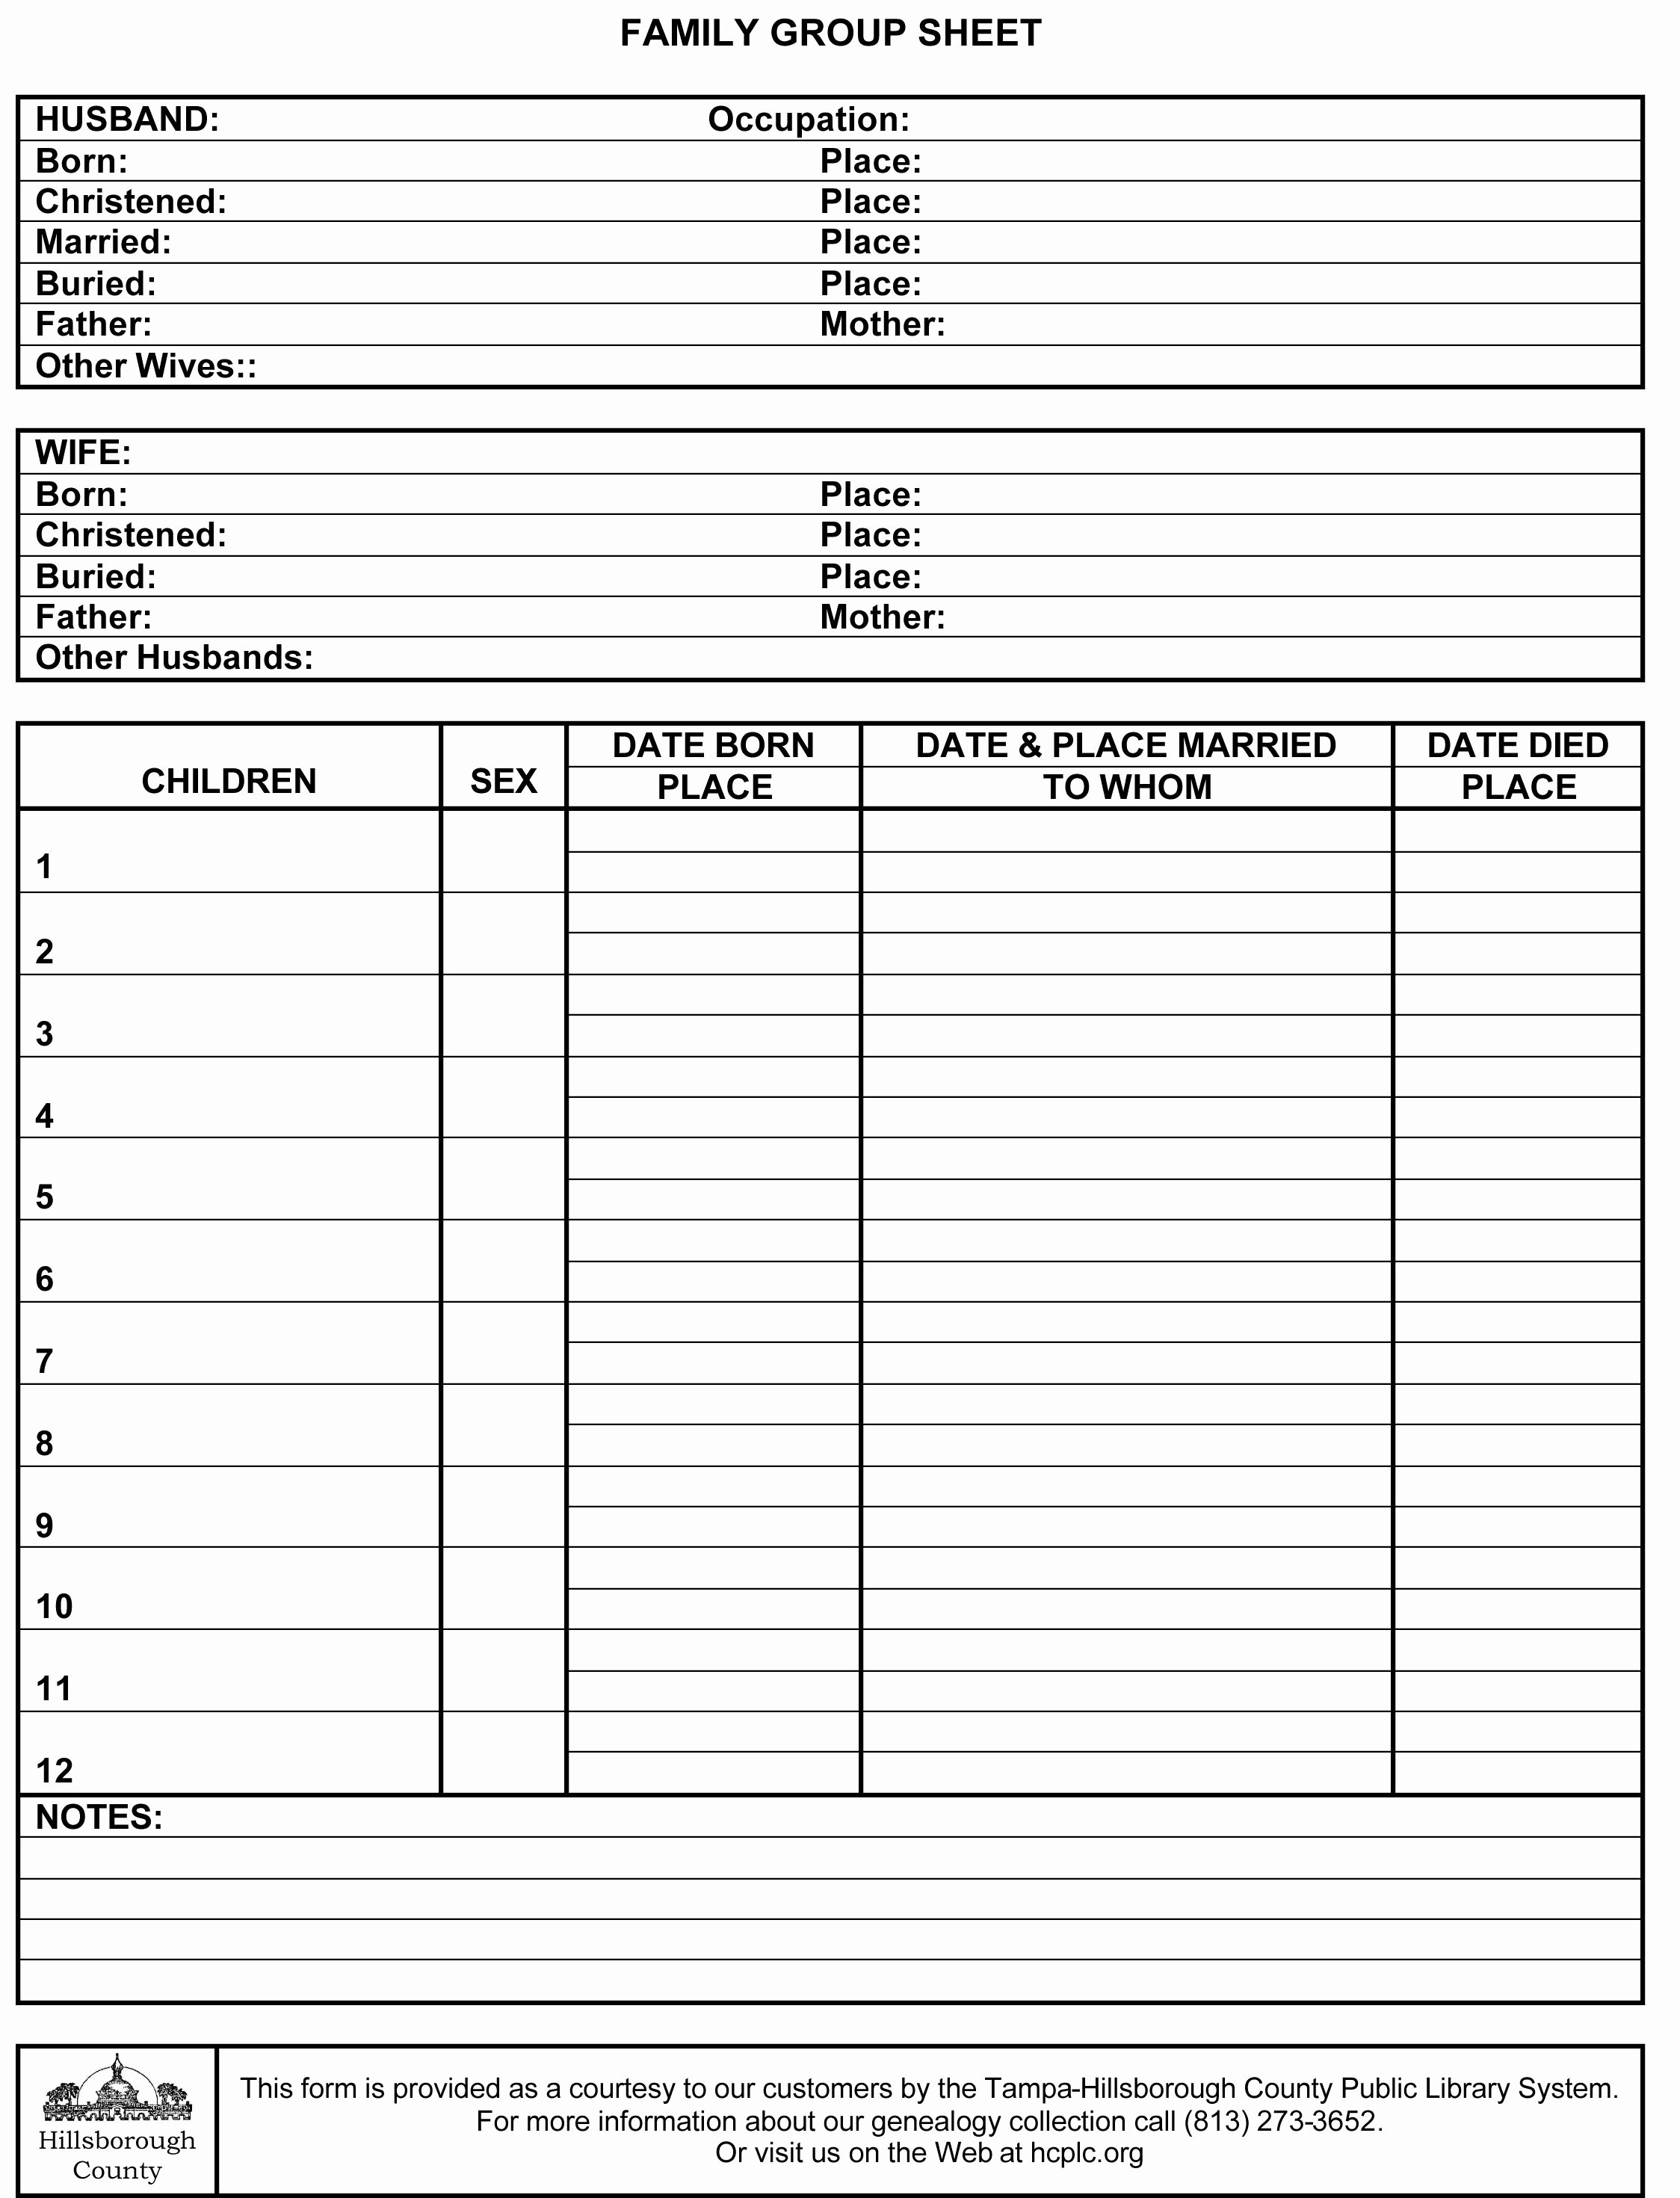 Family Tree Templates Excel Fresh Family Group Sheet Pile Information About An Ancestor